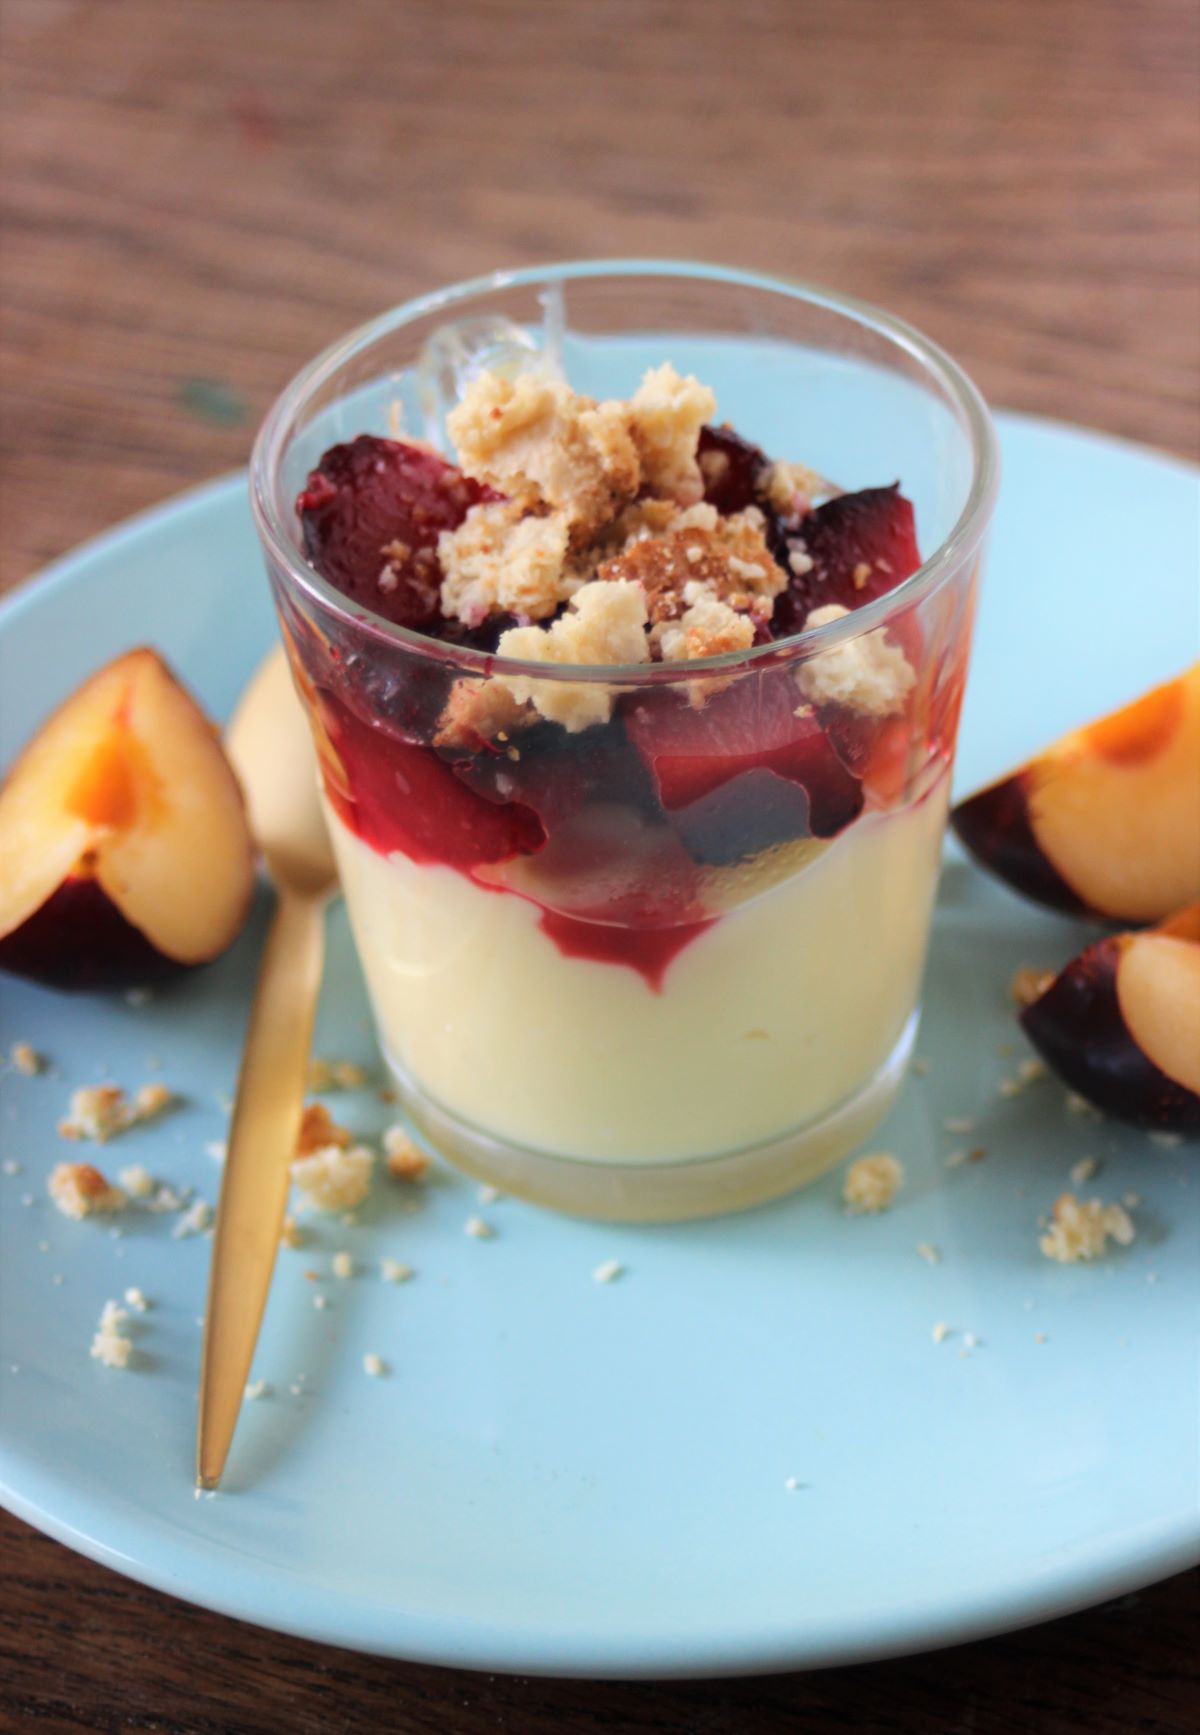 Glass cup with cream, plum compote, and crumbs. Slices of plums on the side.